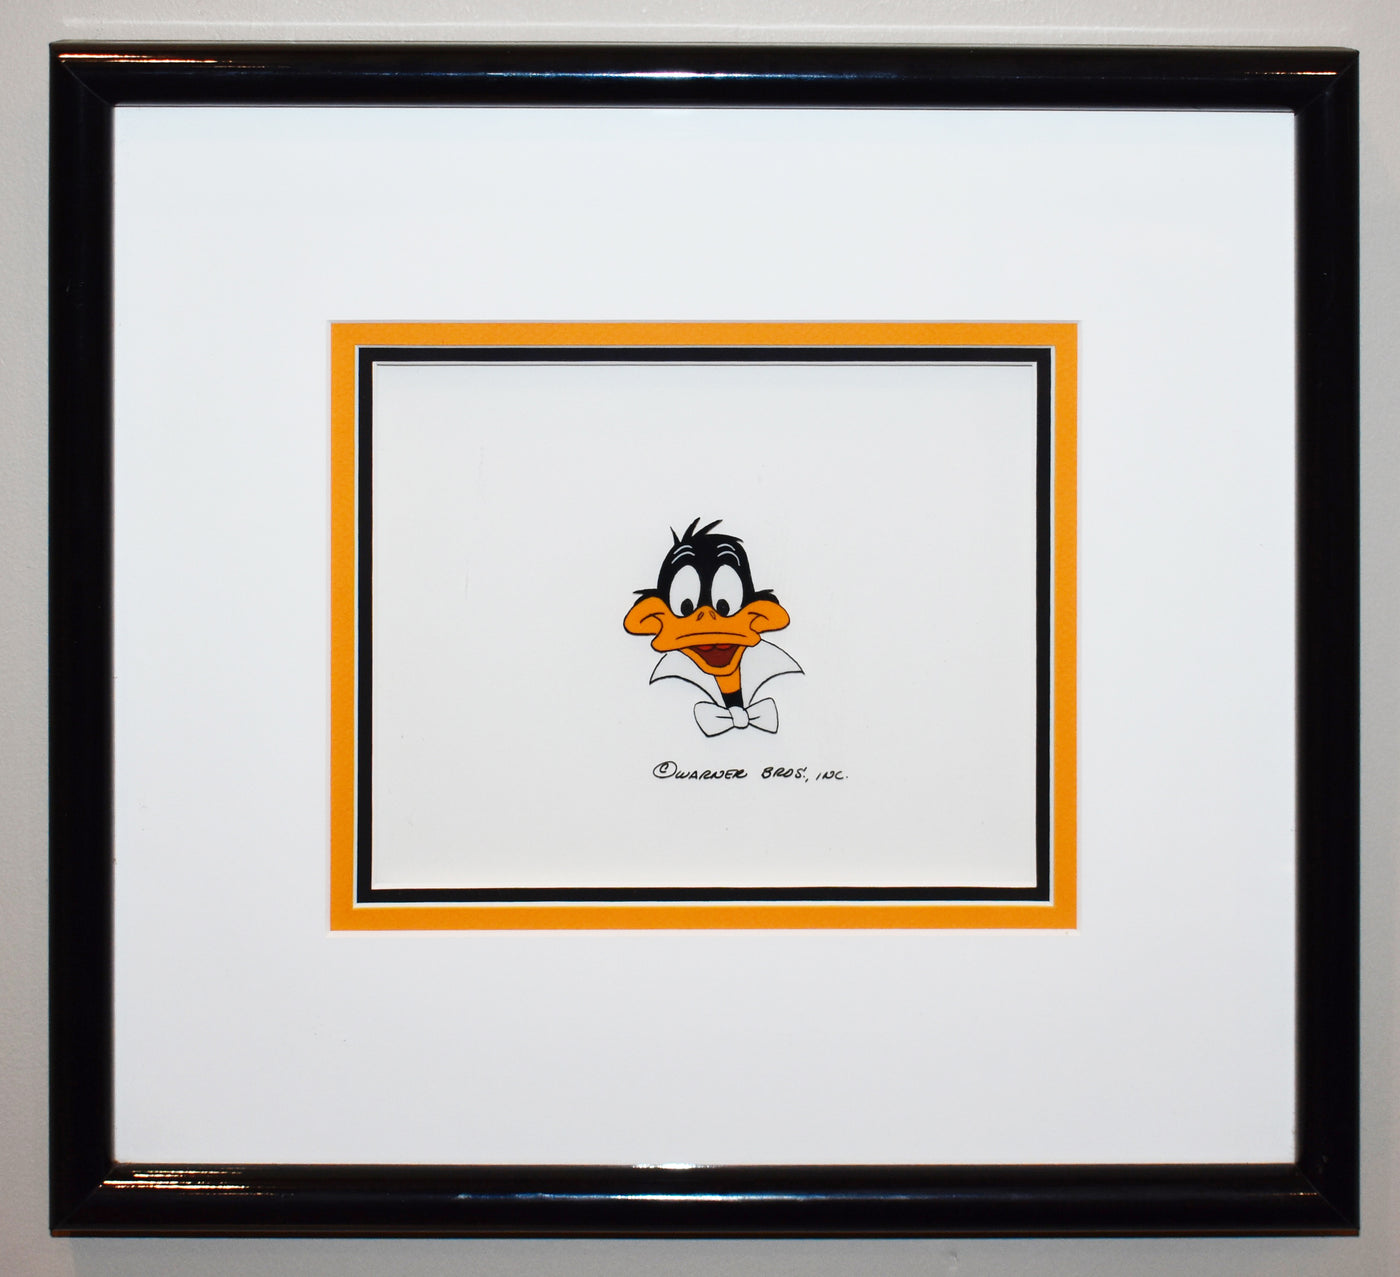 Original Warner Brothers Production Cel Featuring Daffy Duck